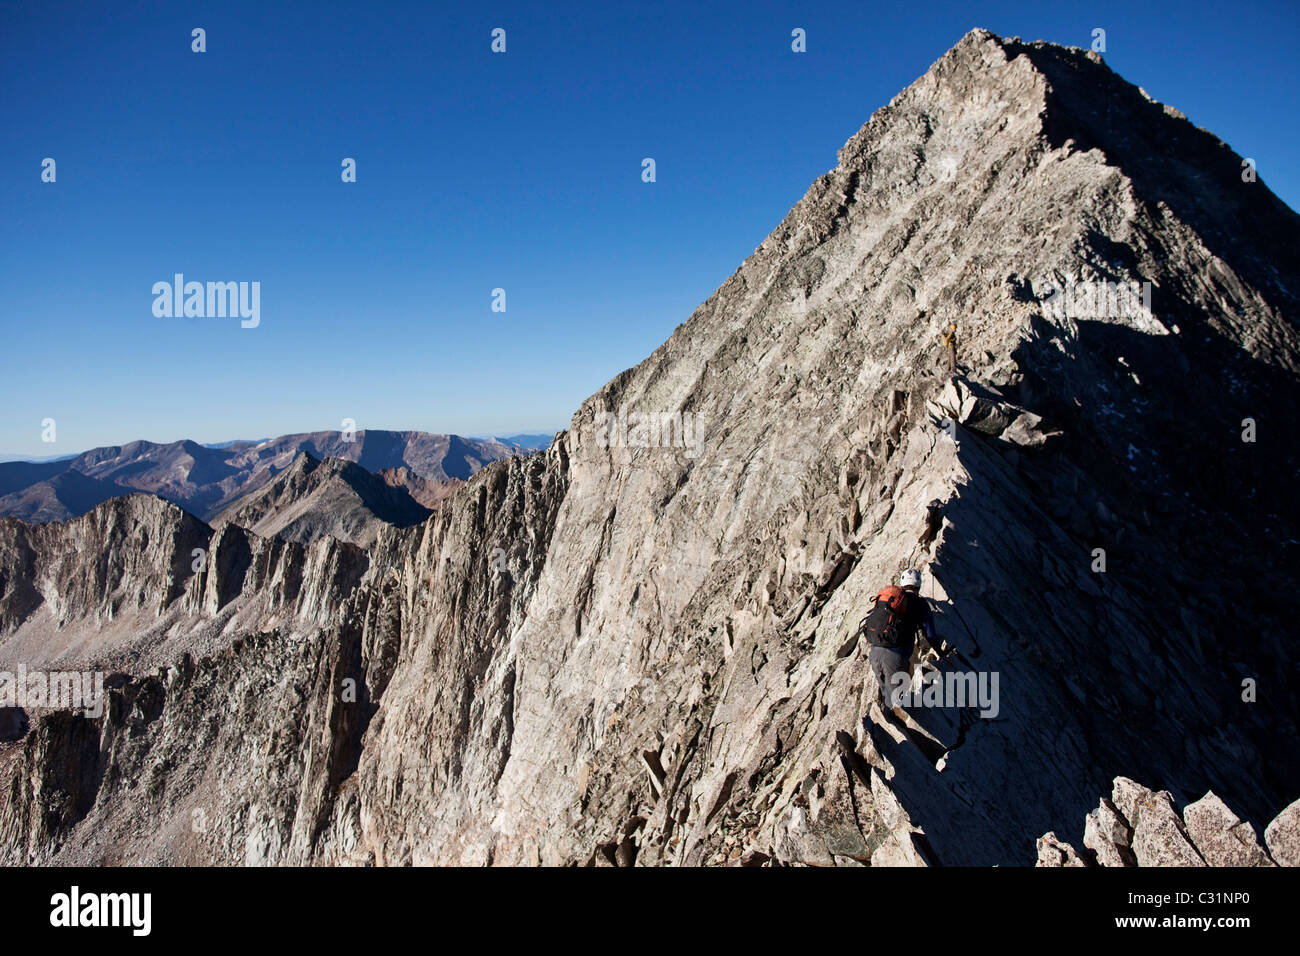 Two young men crossing an exposed ridge line with the summit behind them. Stock Photo